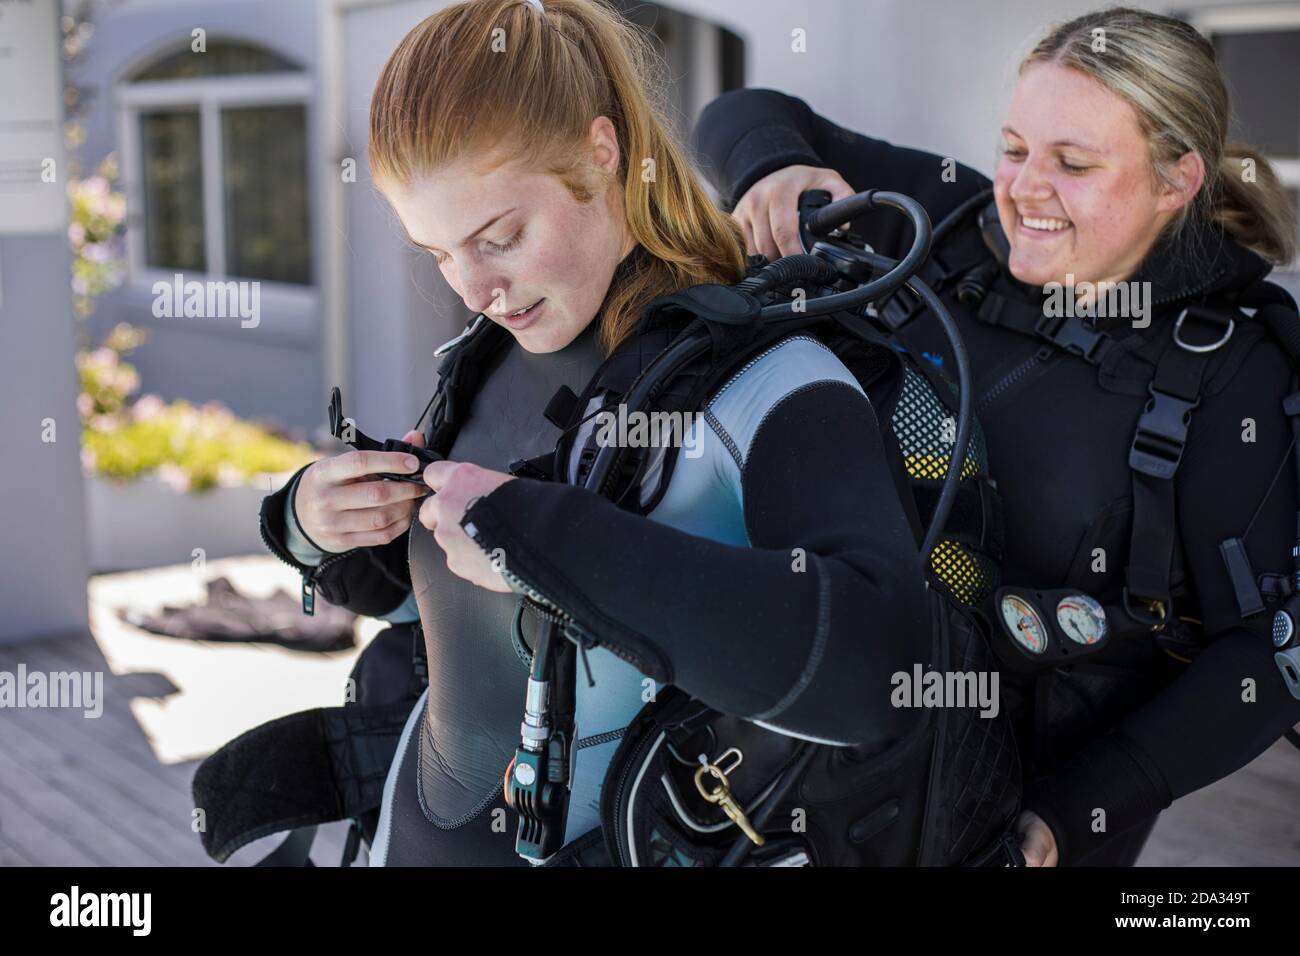 Scuba dive buddies helping each other to put on their BCDs. Stock Photo